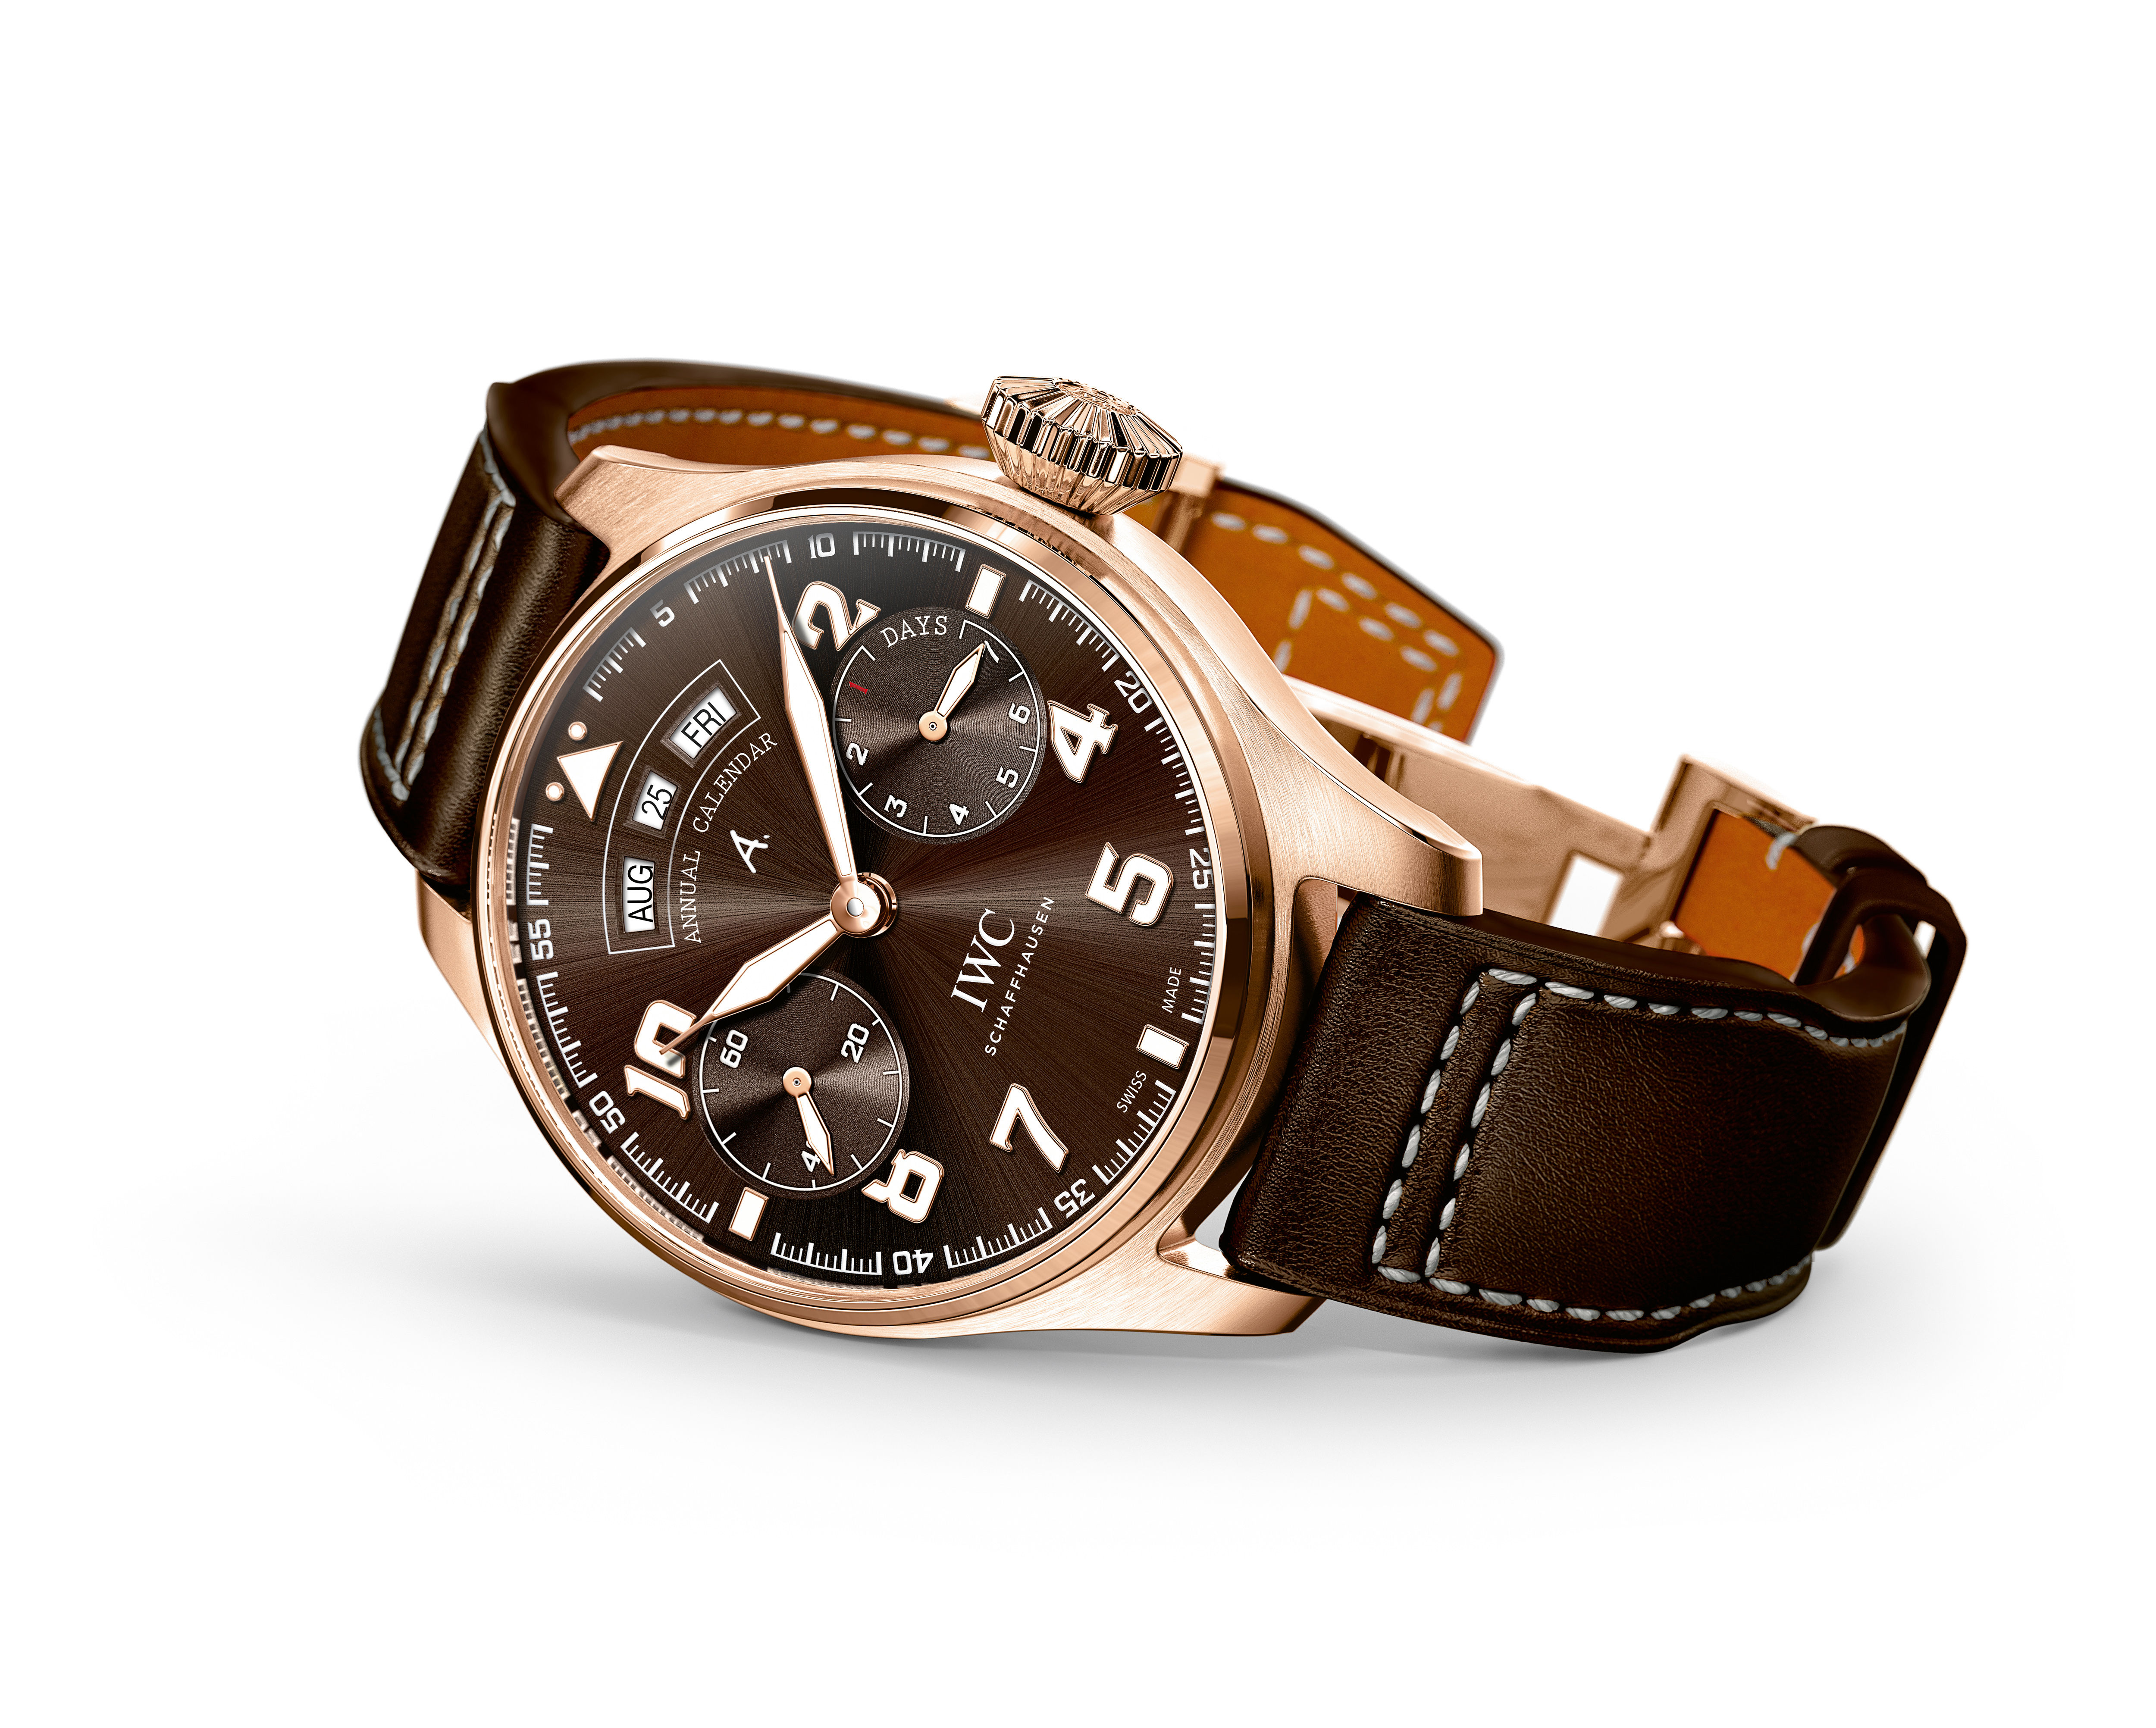 IWC’s new pilot’s watches are ready to take to the skies